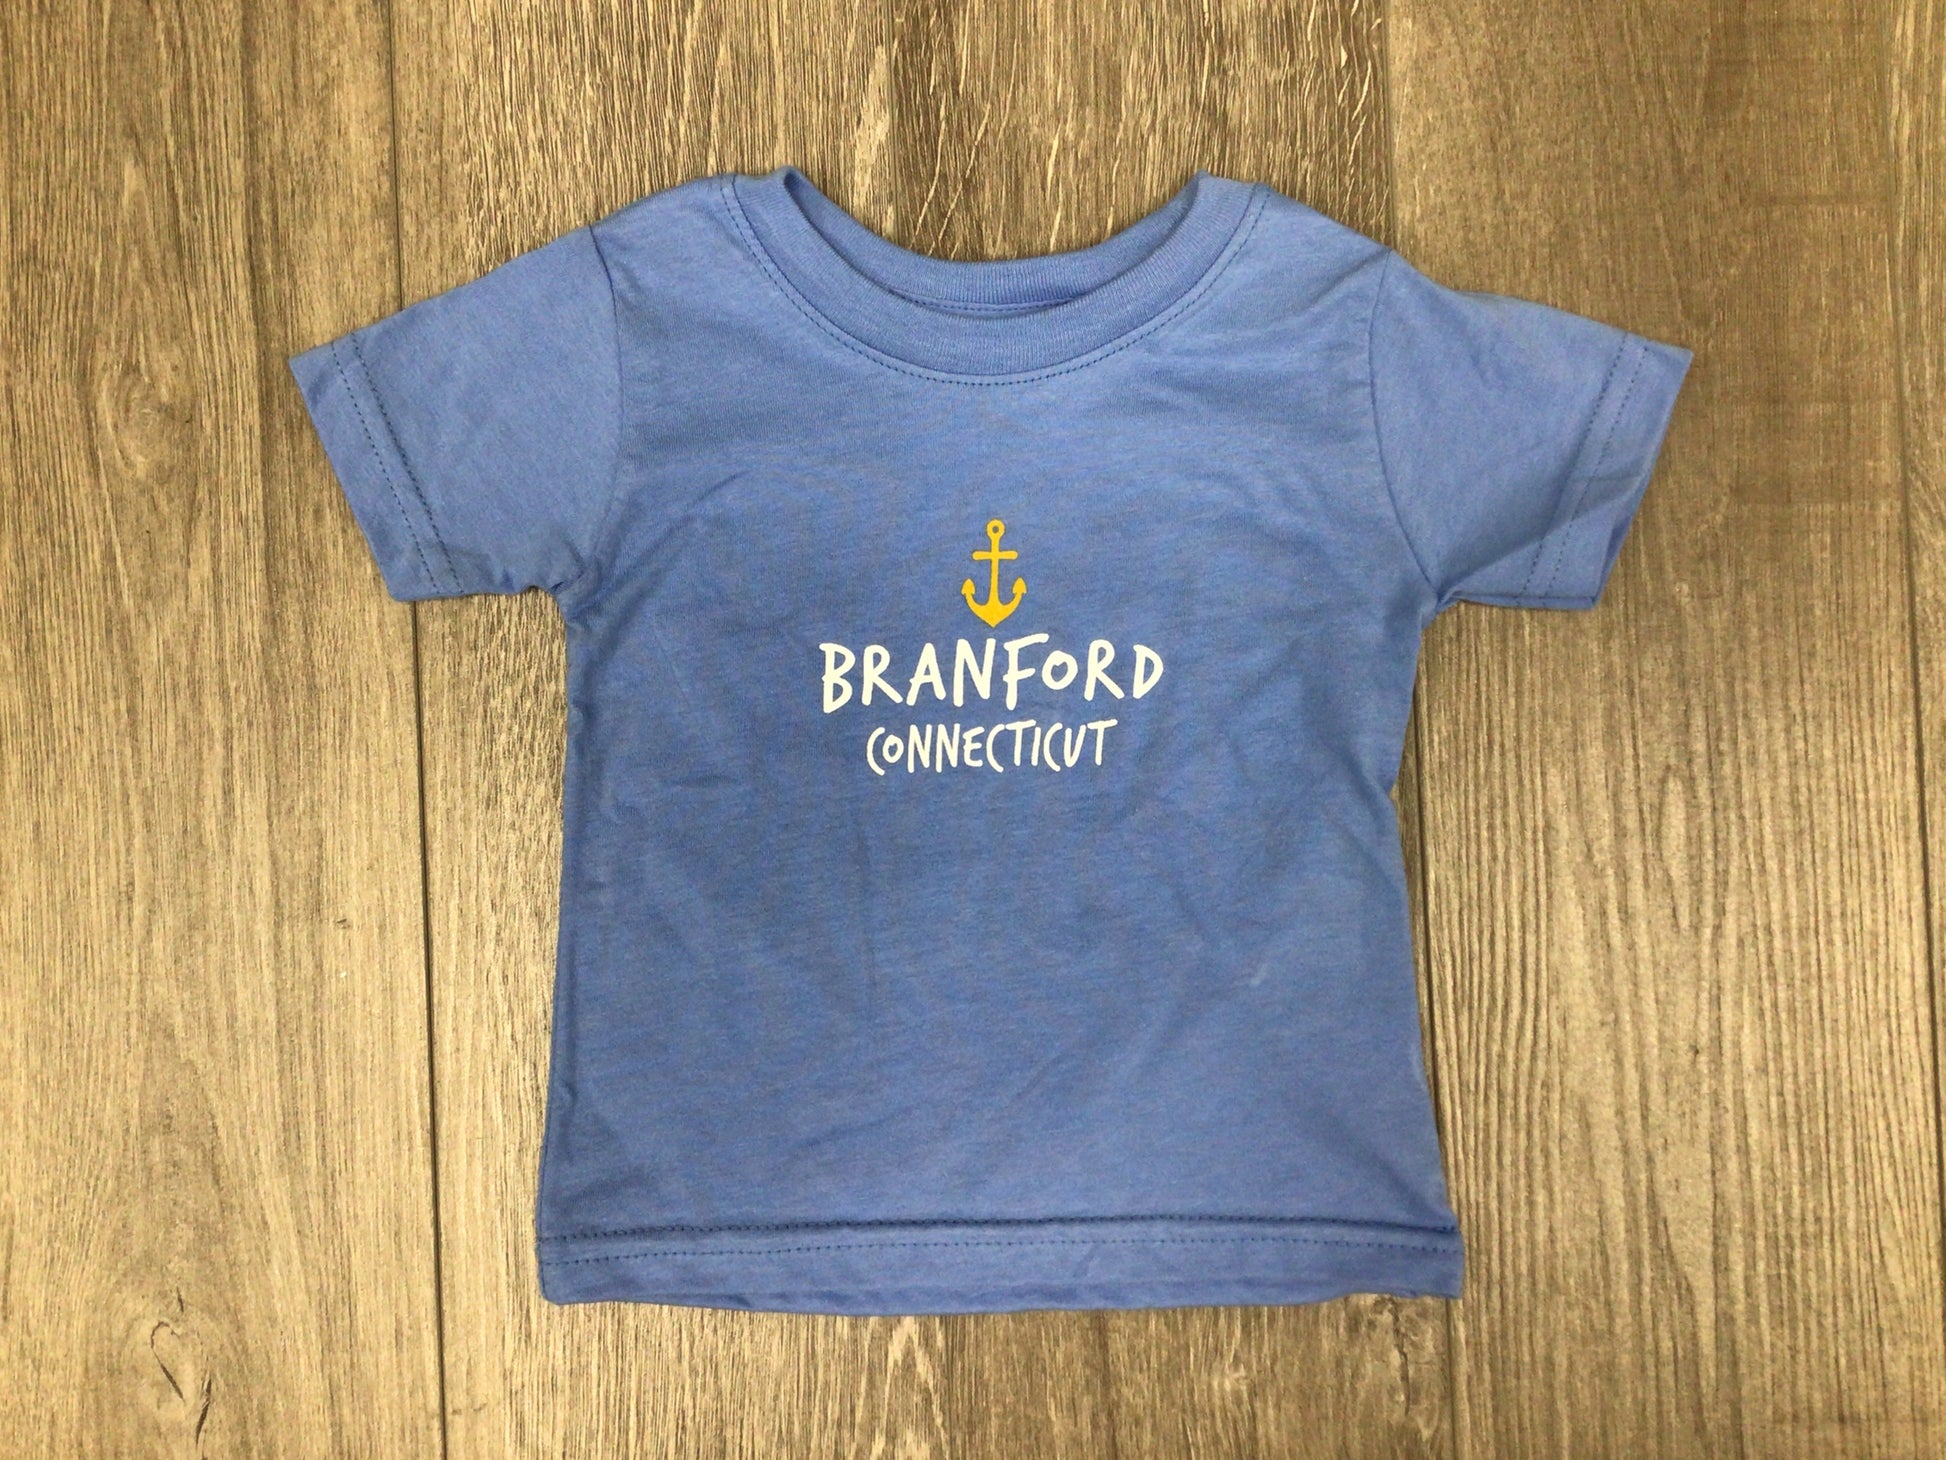 Branford Connecticut toddler t-shirts in blue. Sizes available for 6 months, 12 months, 18 months, 2T, 3T, and 4T.